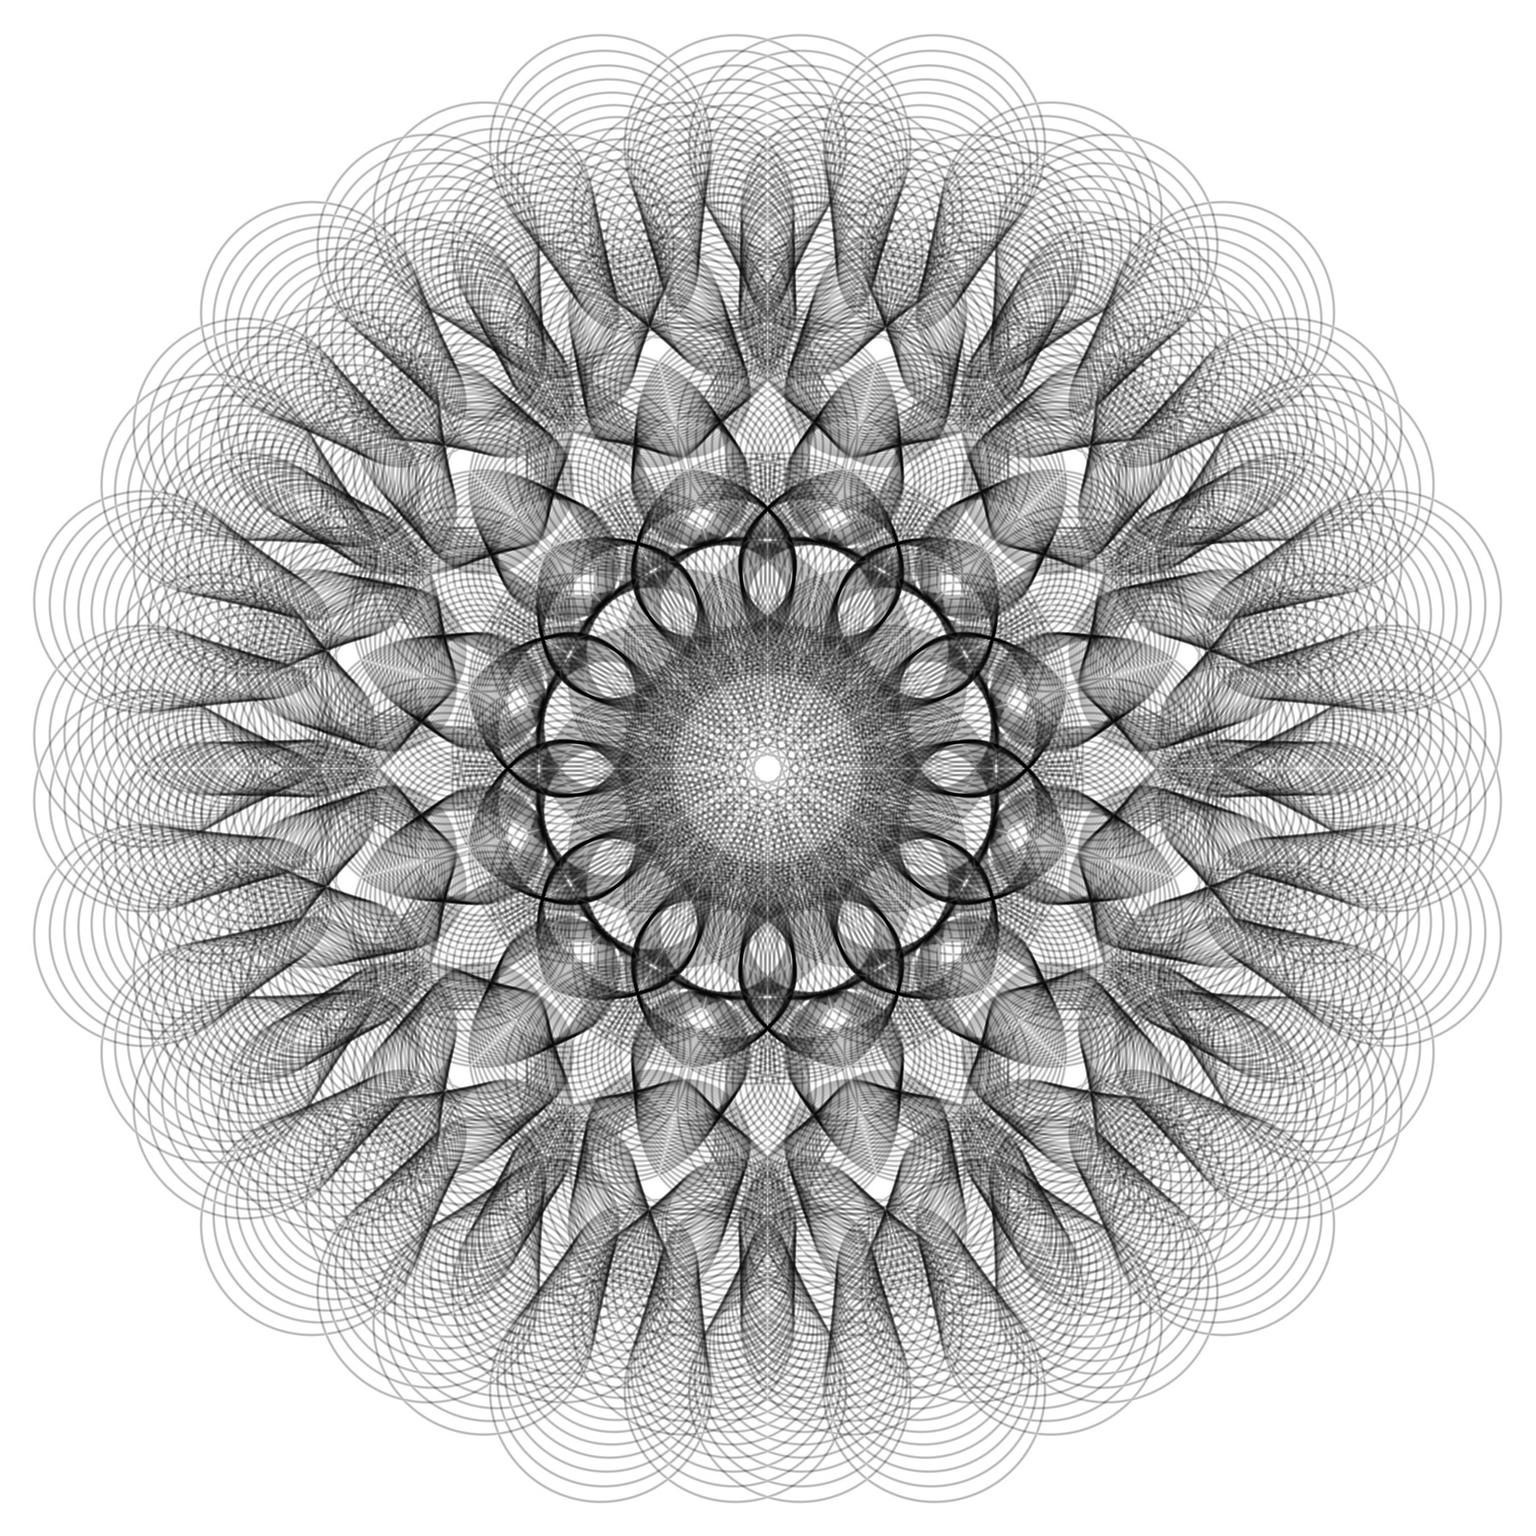 Image for entry 'Iterated Circles 12'